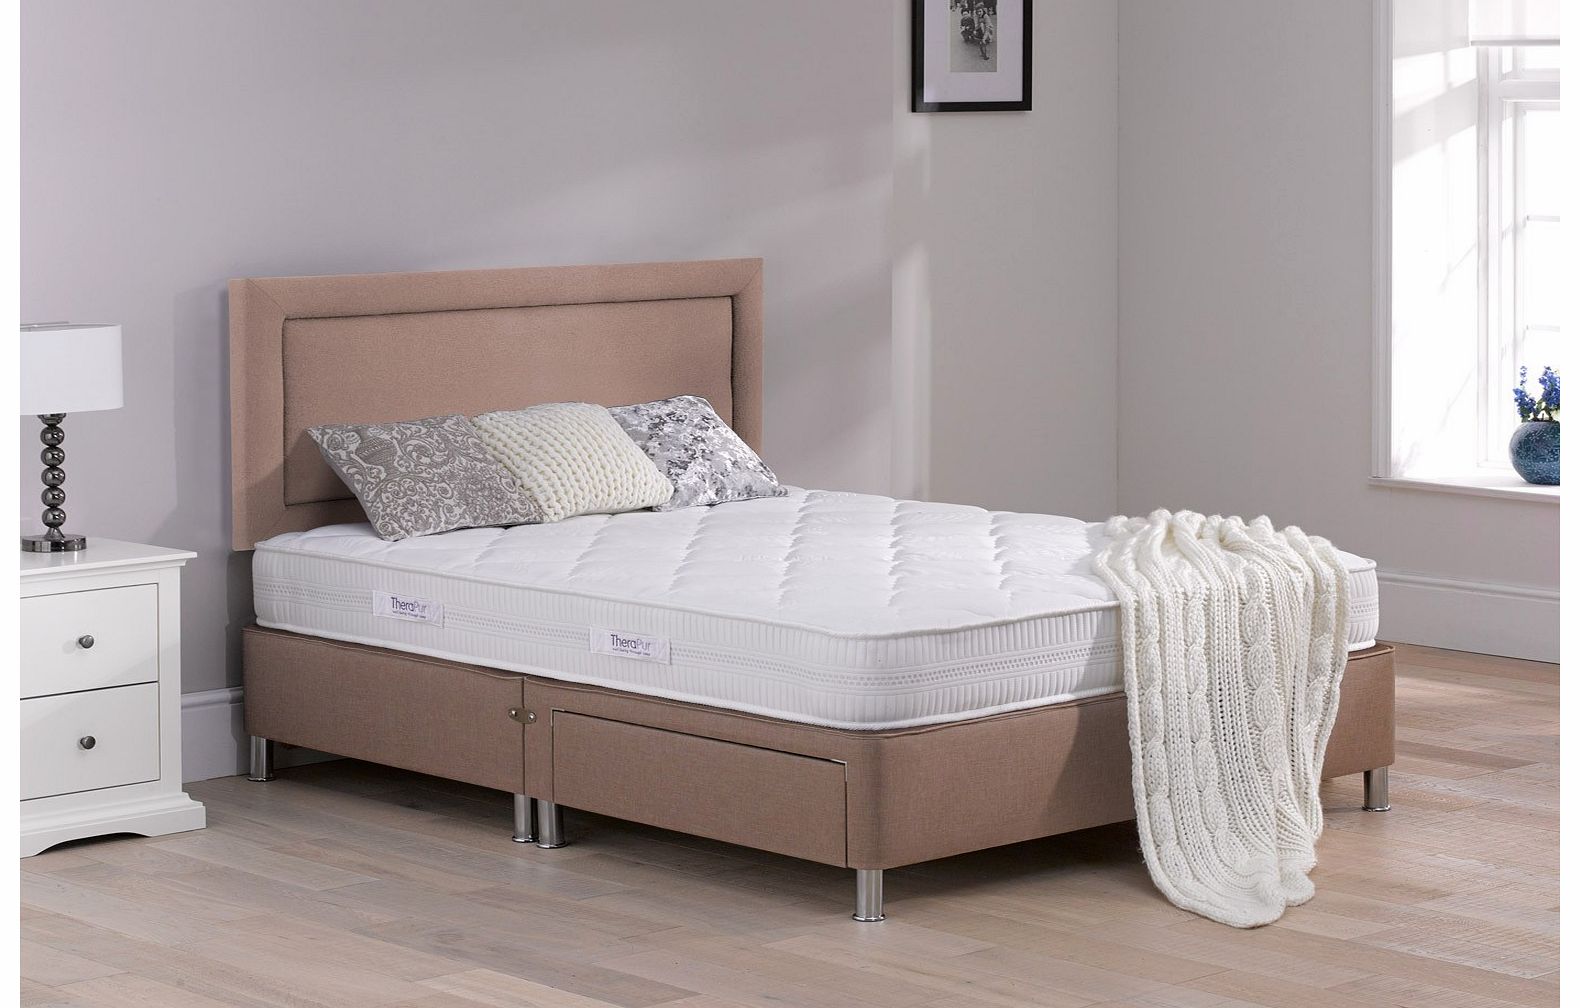 4`0 Small Double Therapur Hush 20 Divan Bed With Legs - Medium